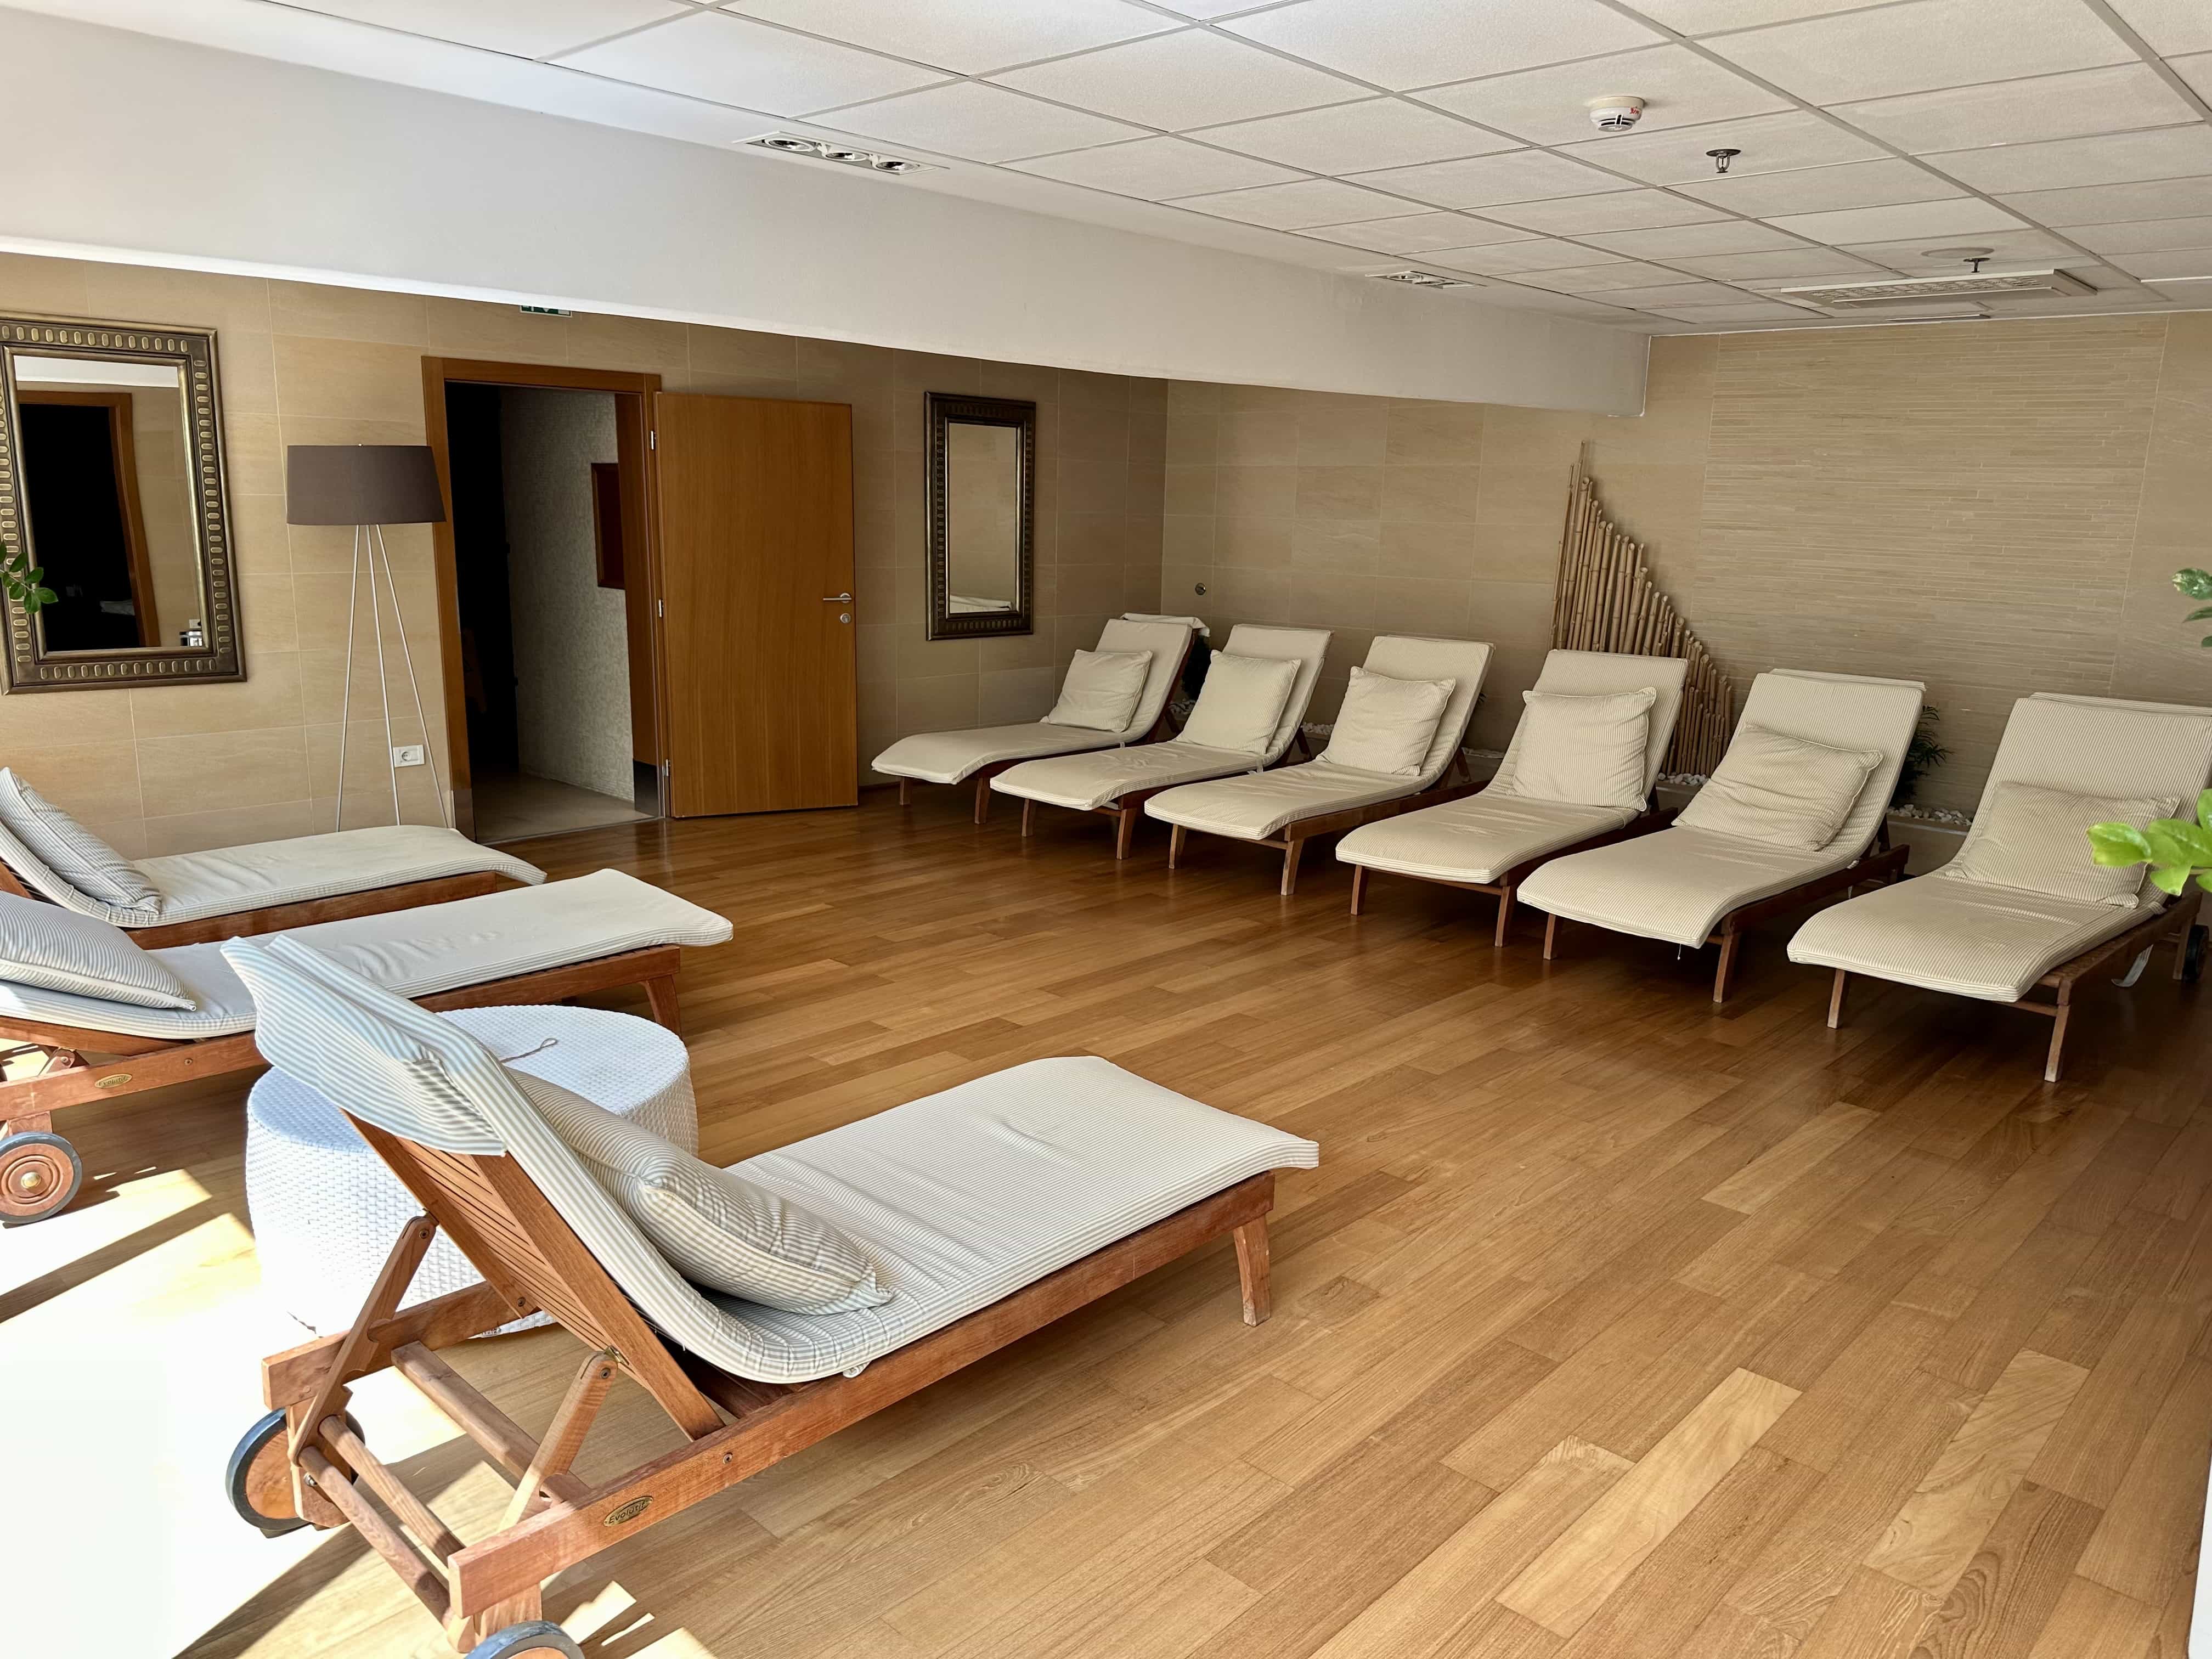 An indoor relaxation area with deck chairs and amenities